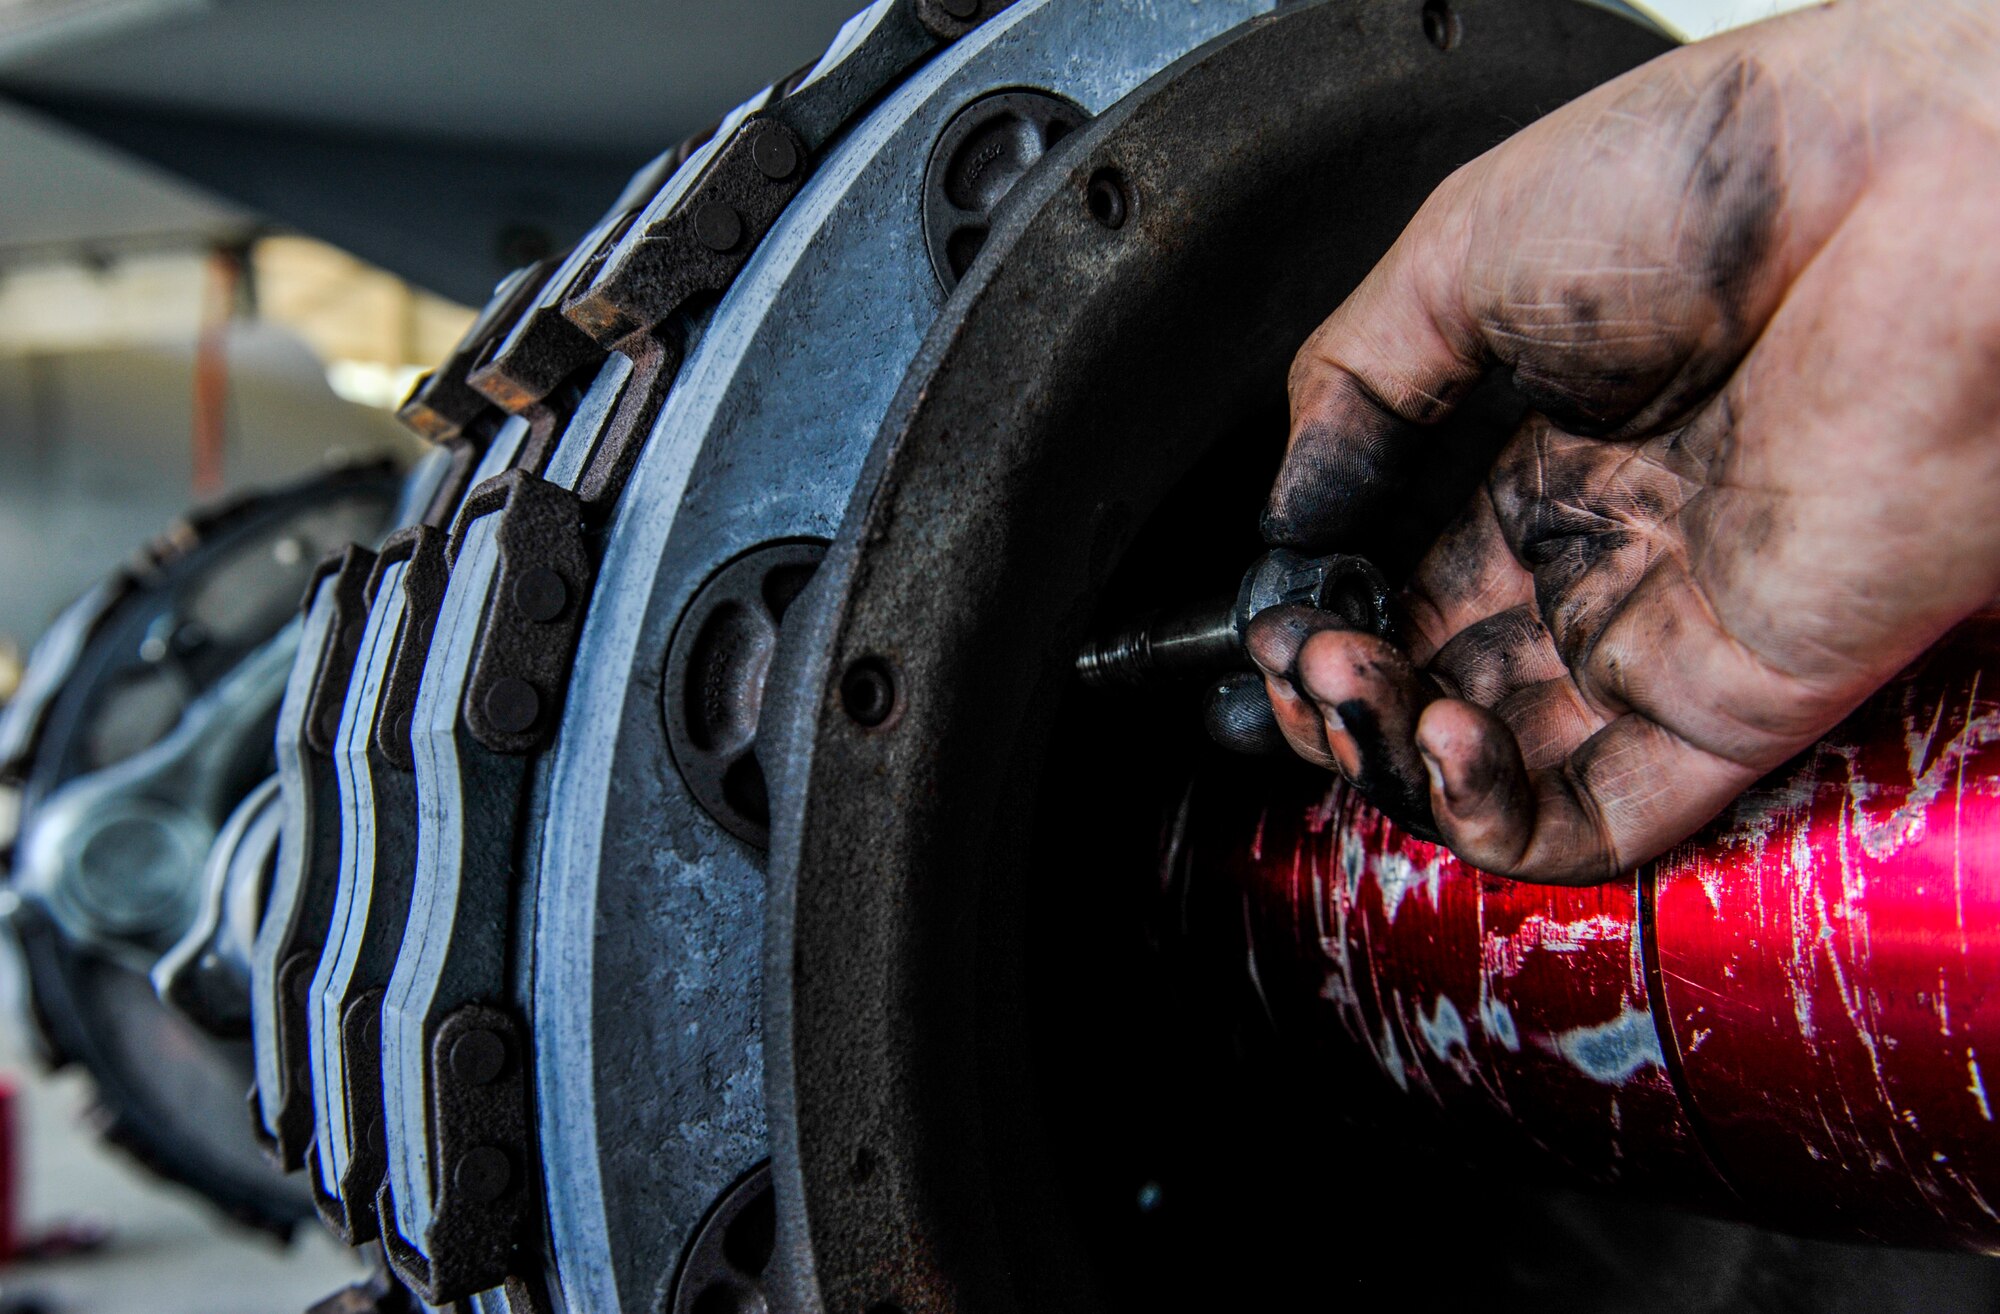 U.S. Air Force Airman 1st Class Andrew Roberts, aircraft inspection apprentice assigned to the 18th Equipment Maintenance Squadron, unscrews a bolt from a KC-135 Stratotanker during an isochronal inspection at Kadena Air Base, Japan, May 22, 2019.